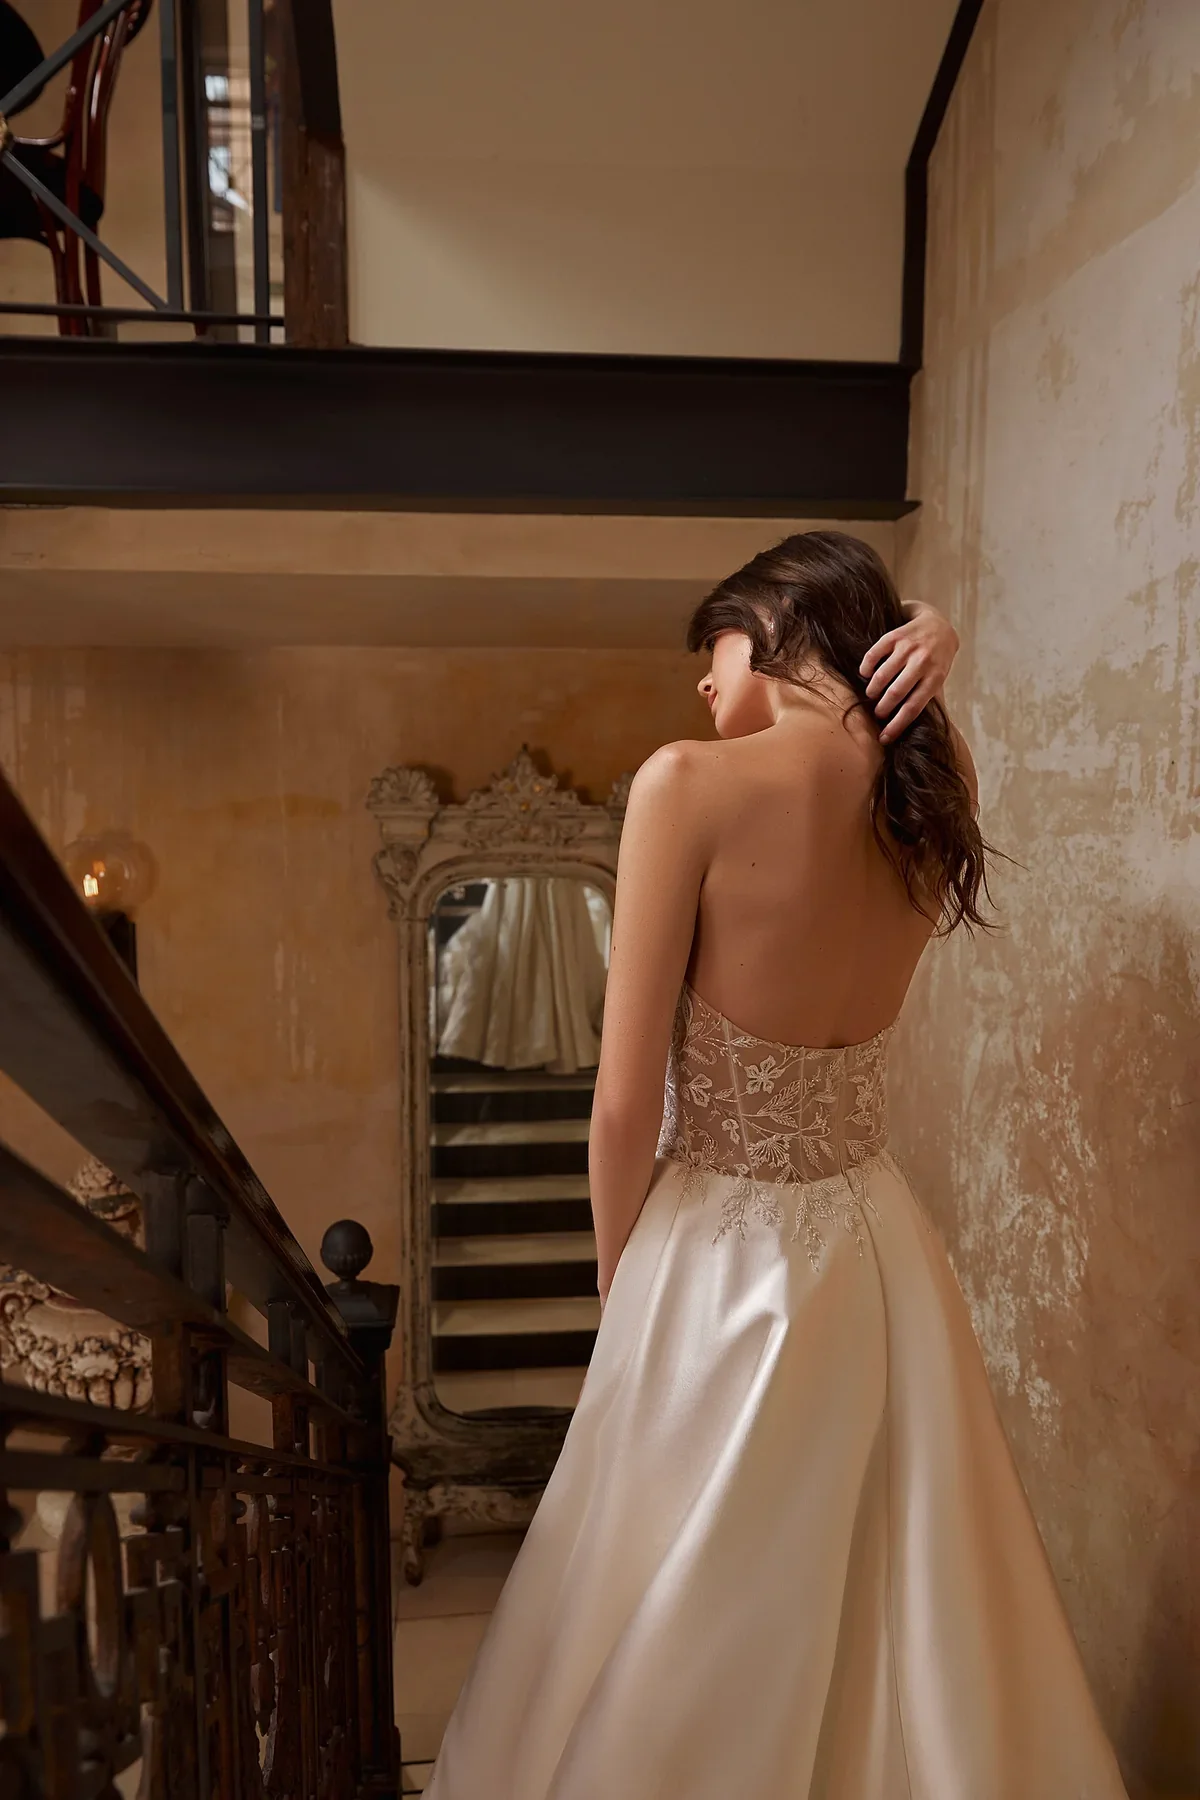 Asymmetrical Strapless Mikado Gown With Slit by Enaura Bridal - Image 2